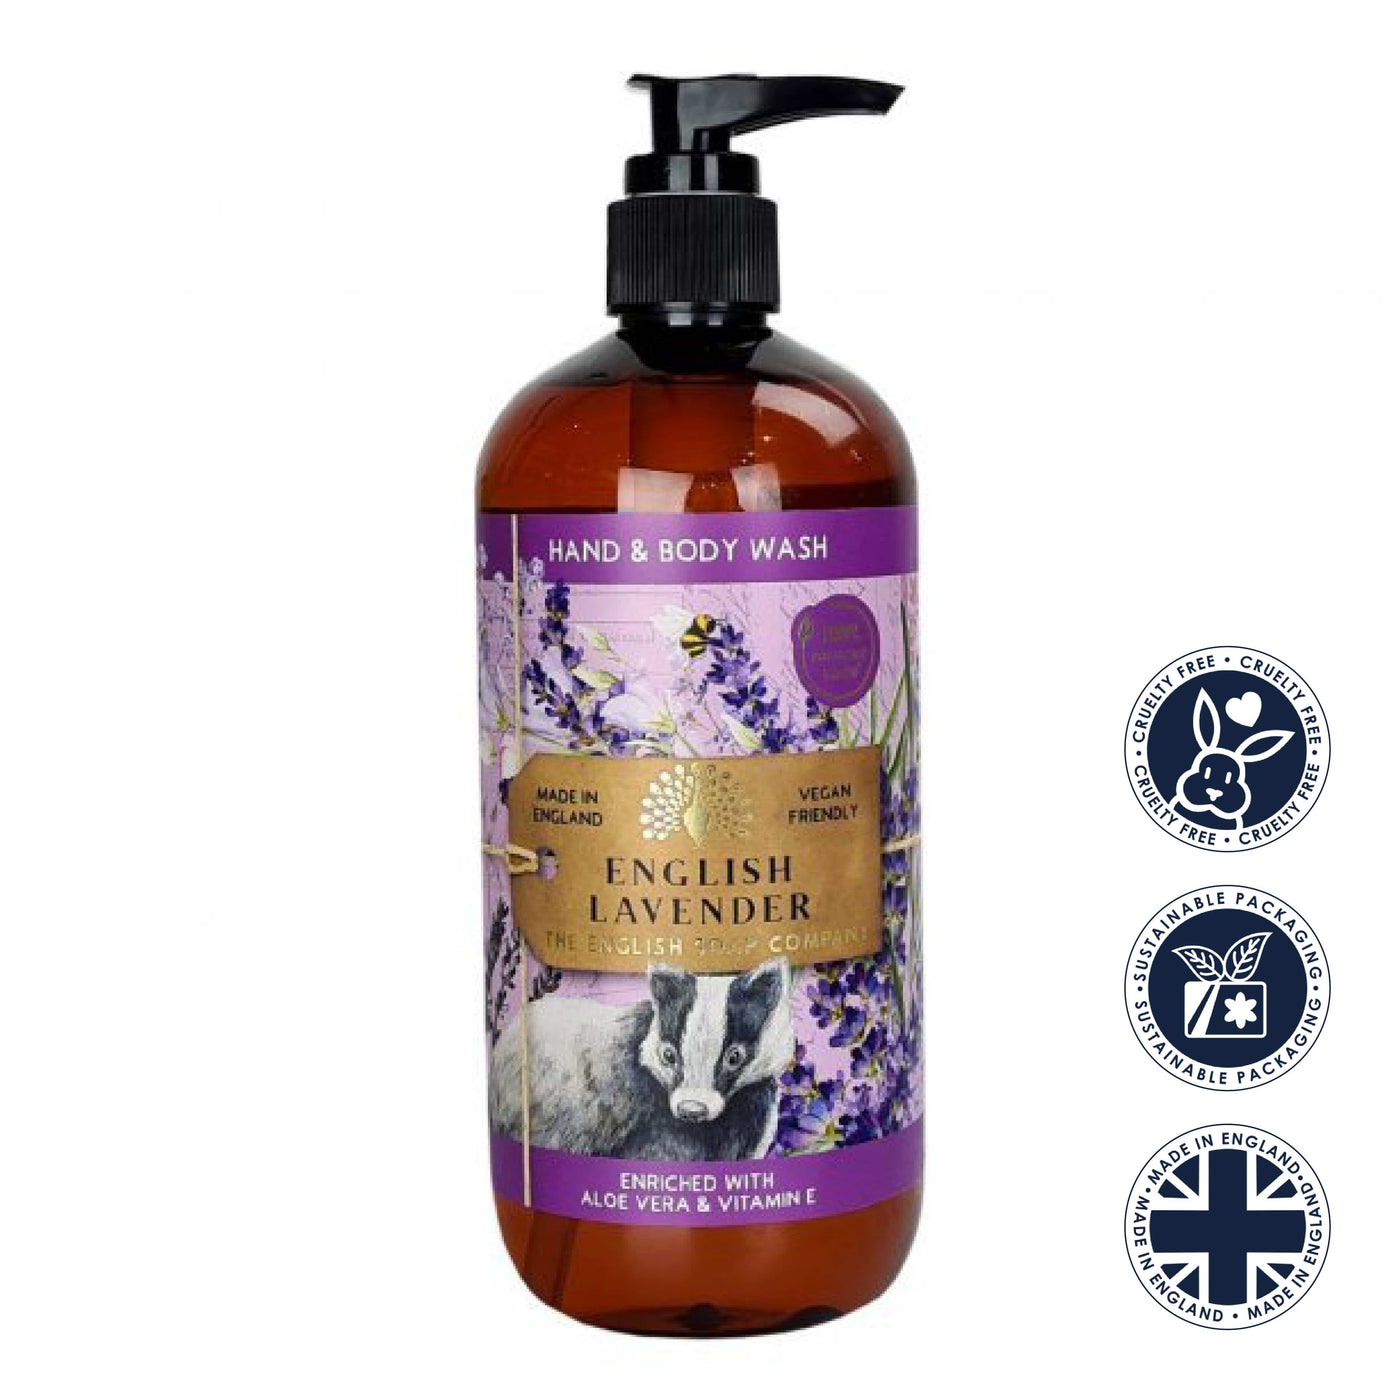 English Lavender Hand & Body Wash - Anniversary Collection from our Liquid Hand & Body Soap collection by The English Soap Company